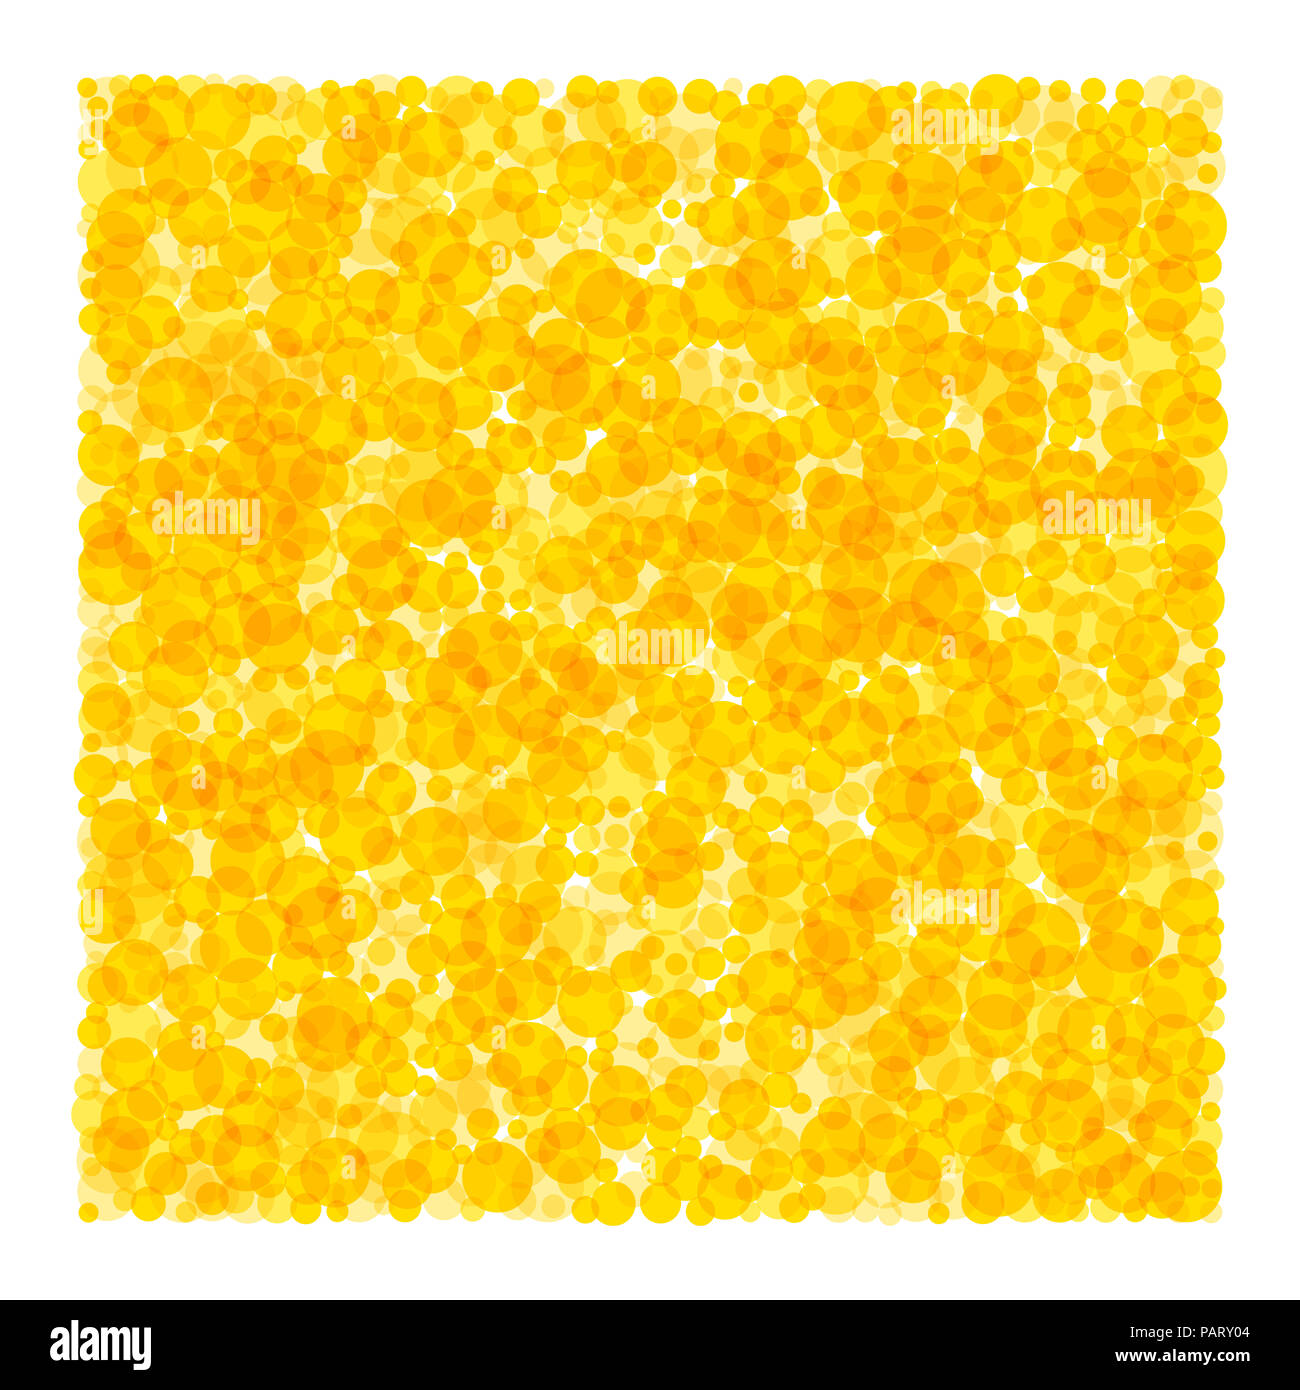 Square made of dots. Many yellow and orange translucent spots forming a bright square shaped area. Sunny decor. Illustration. Stock Photo